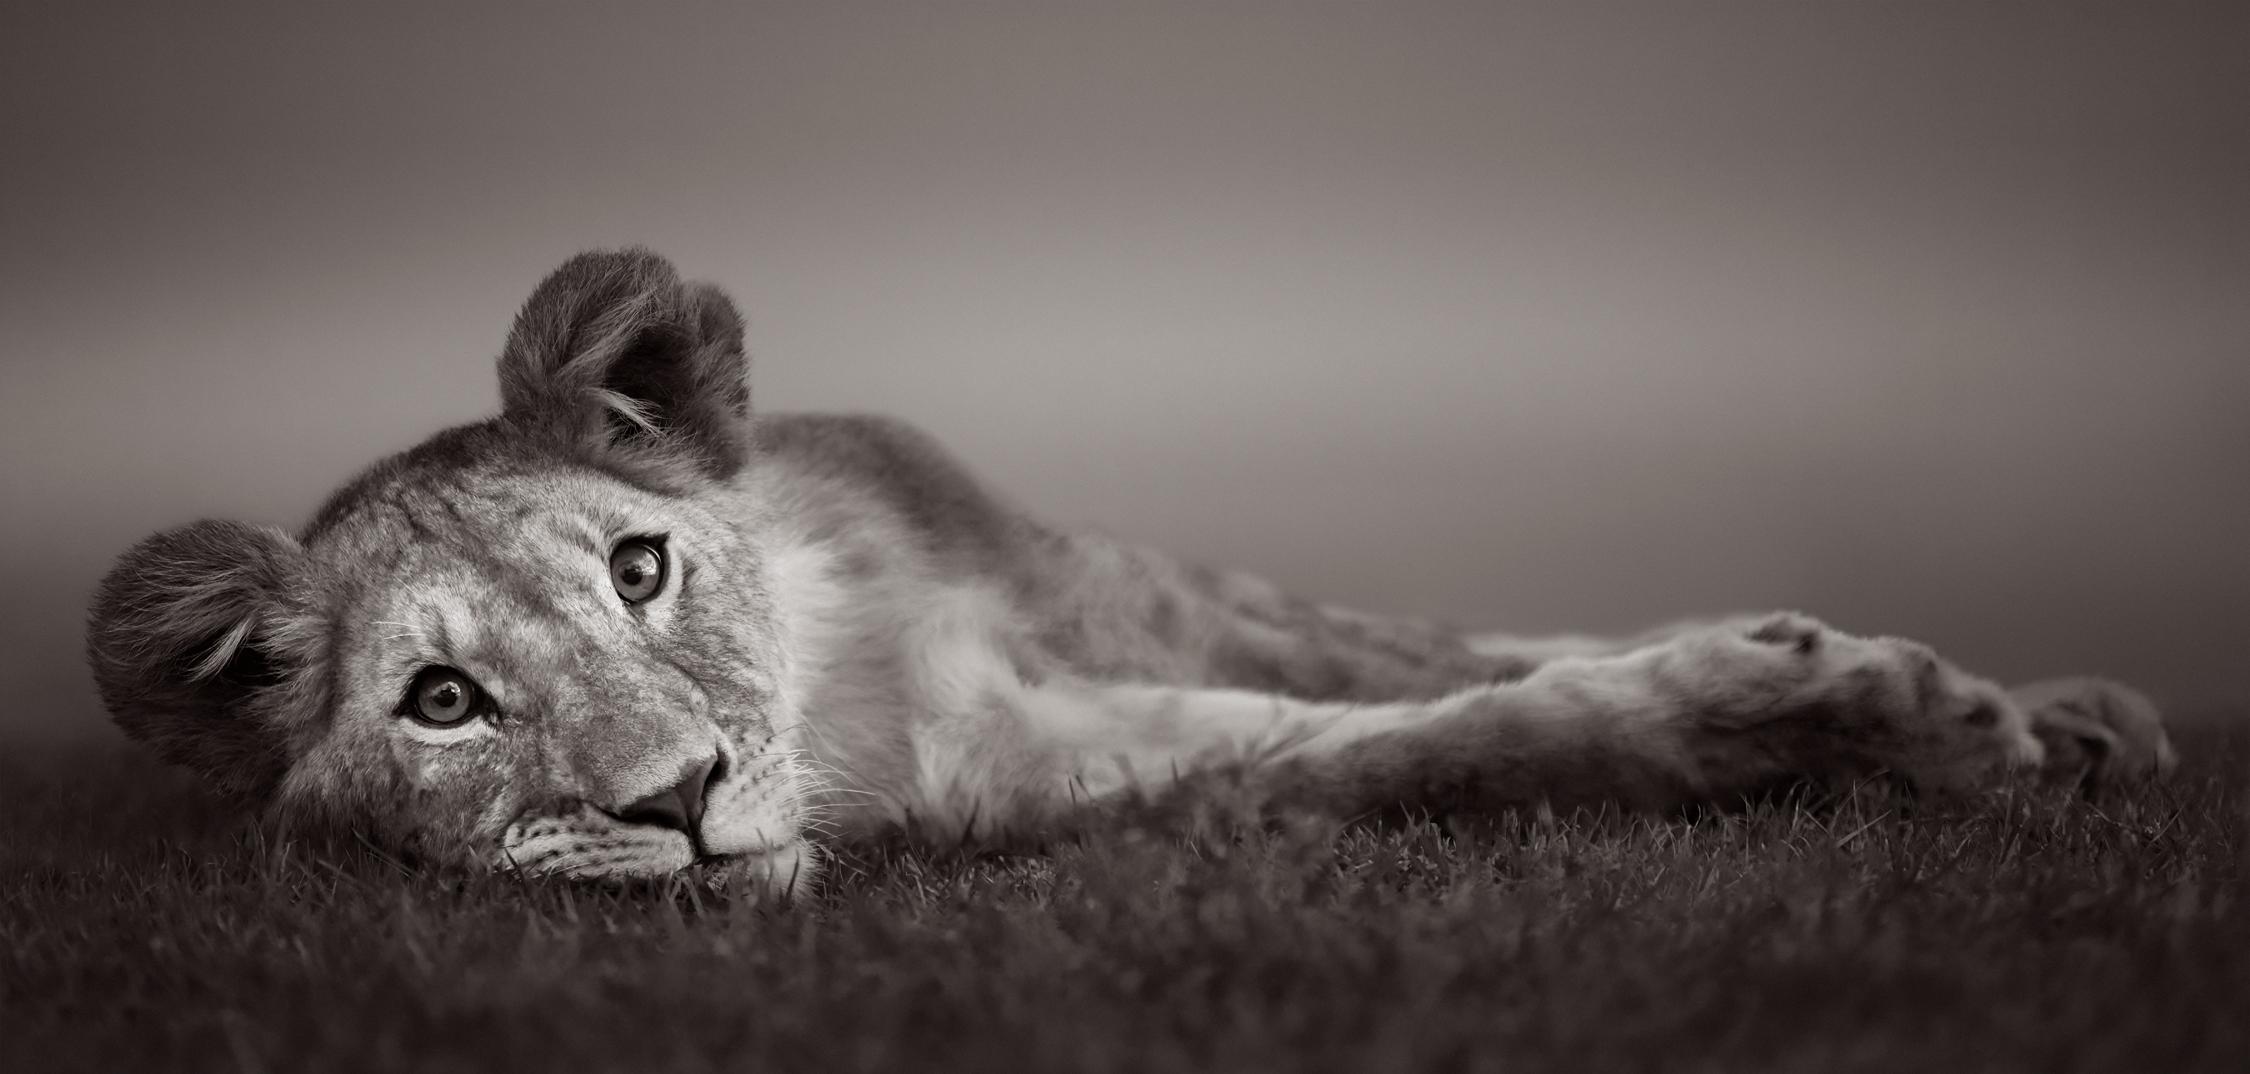 Drew Doggett Black and White Photograph - Young Lion Cub Relaxing in the Grass, Black & White, Kenya